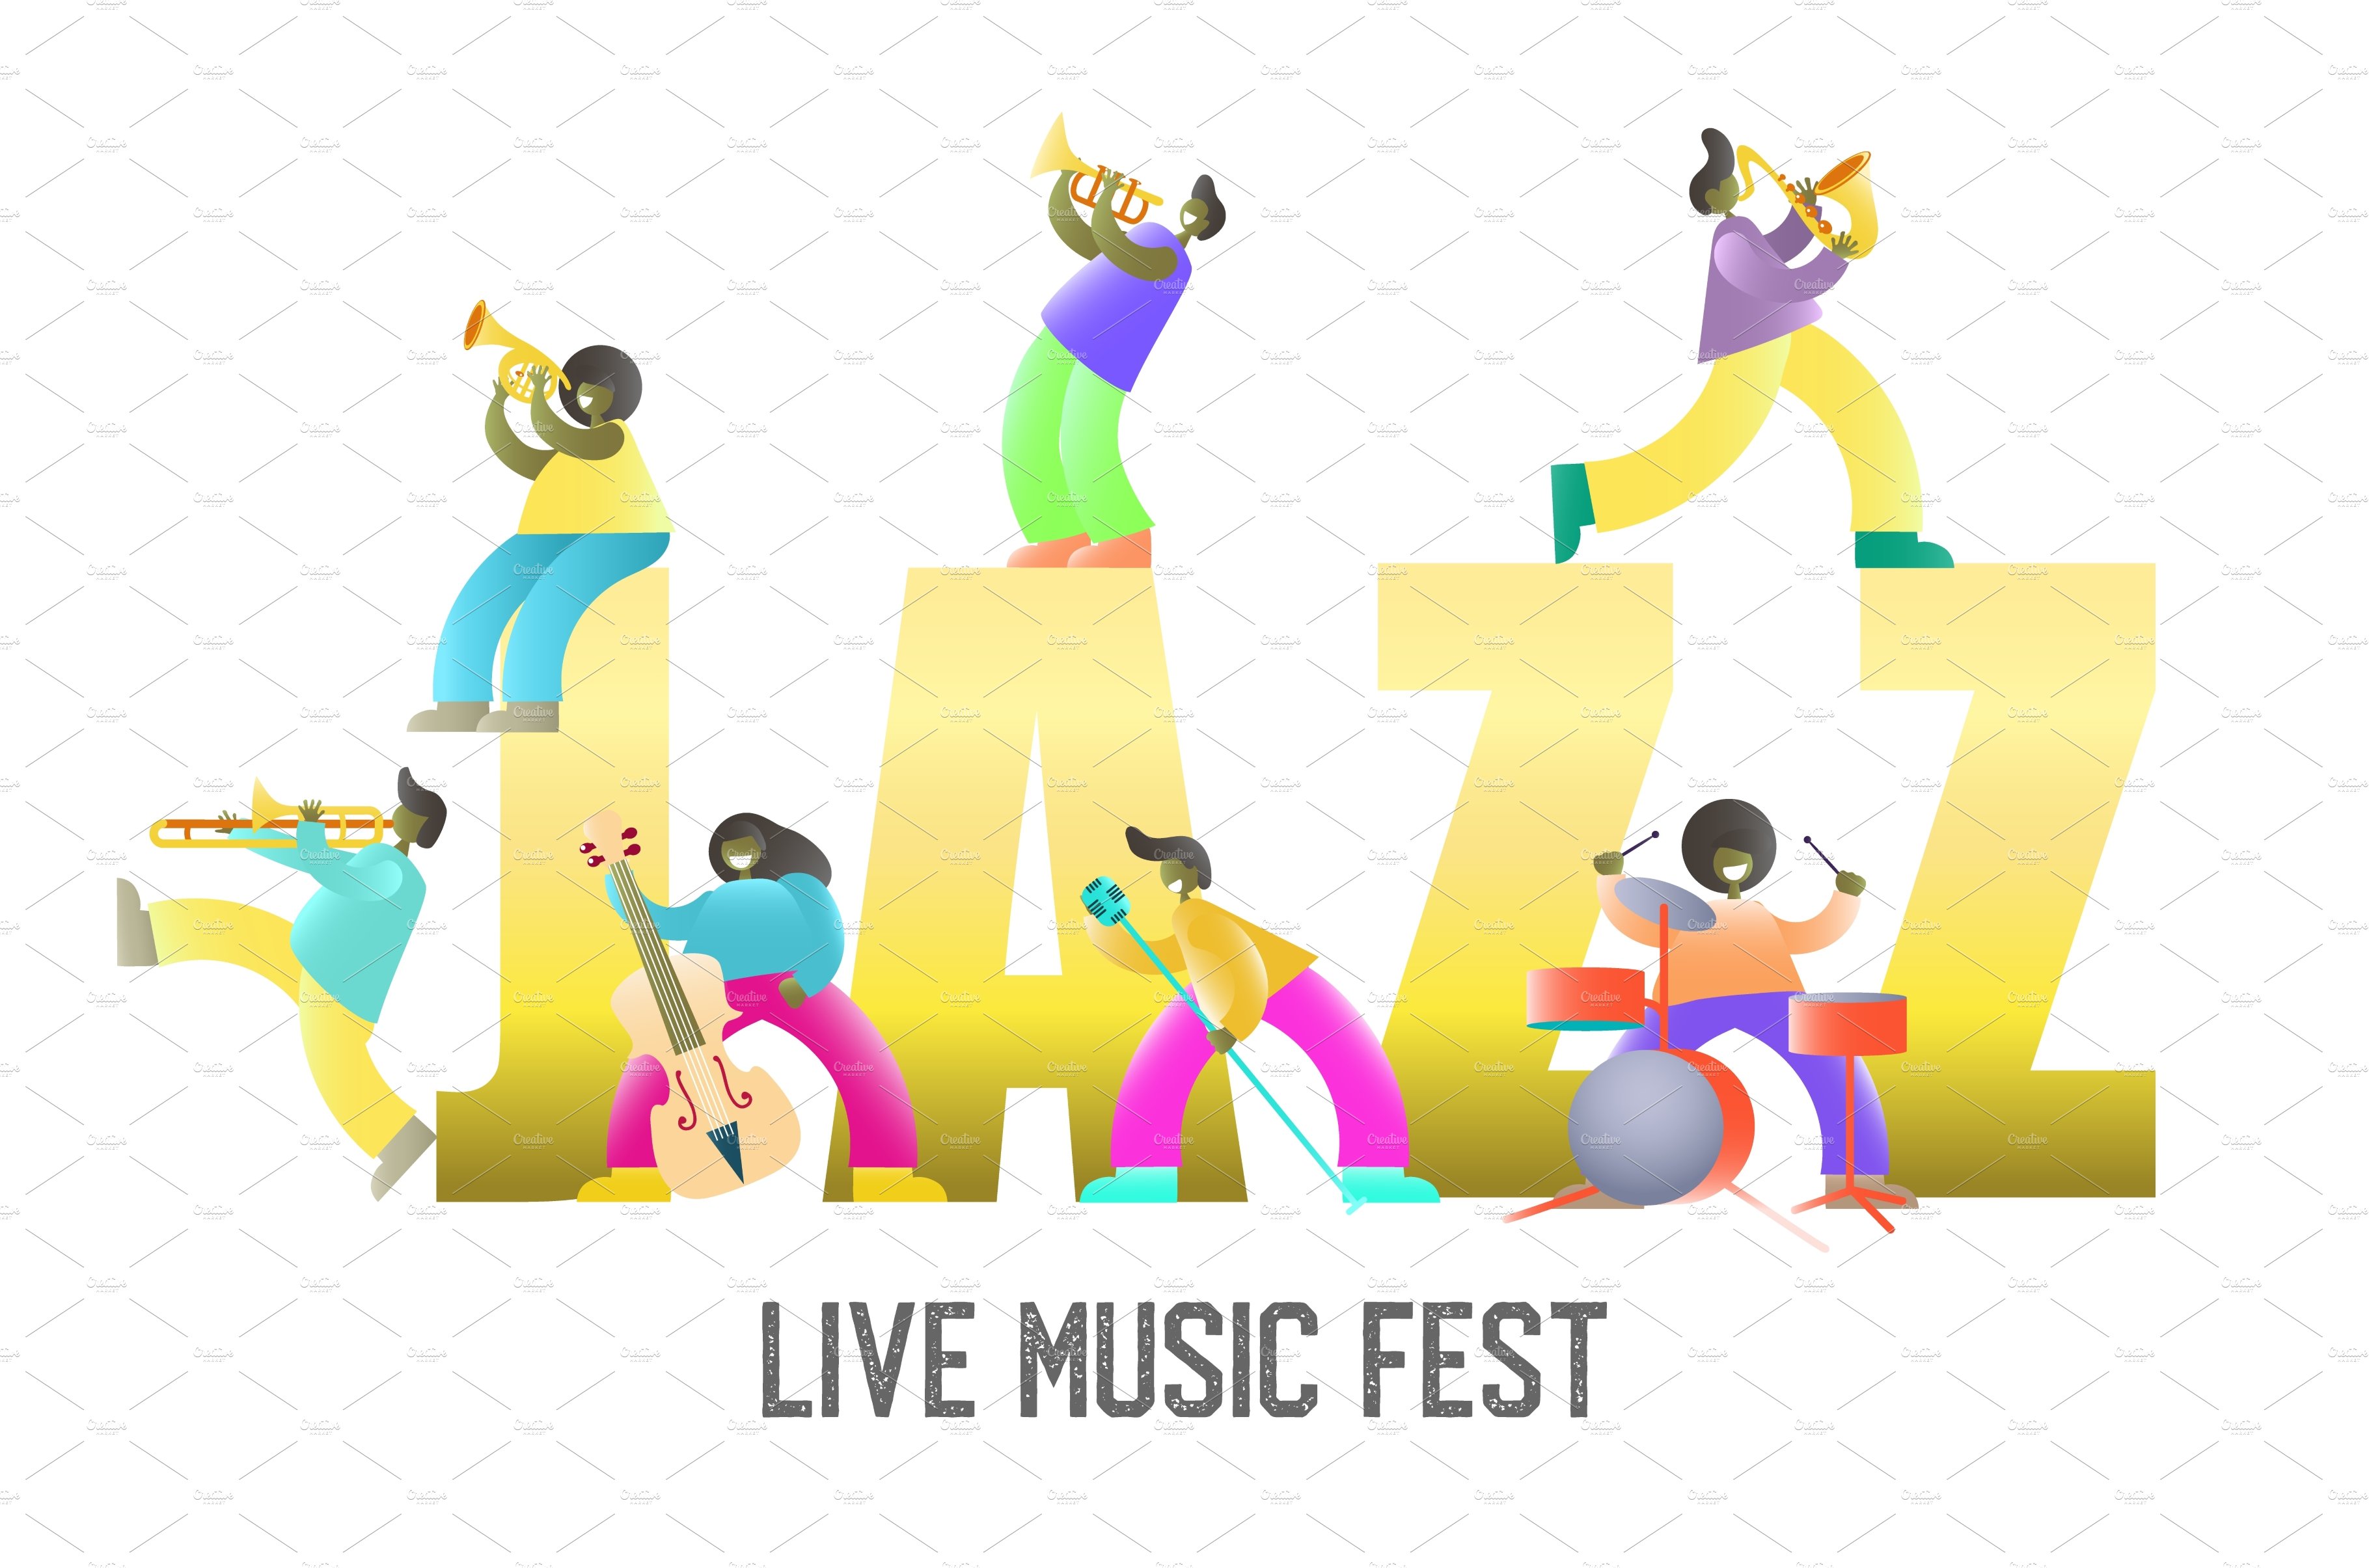 Live music fest vector poster banner cover image.